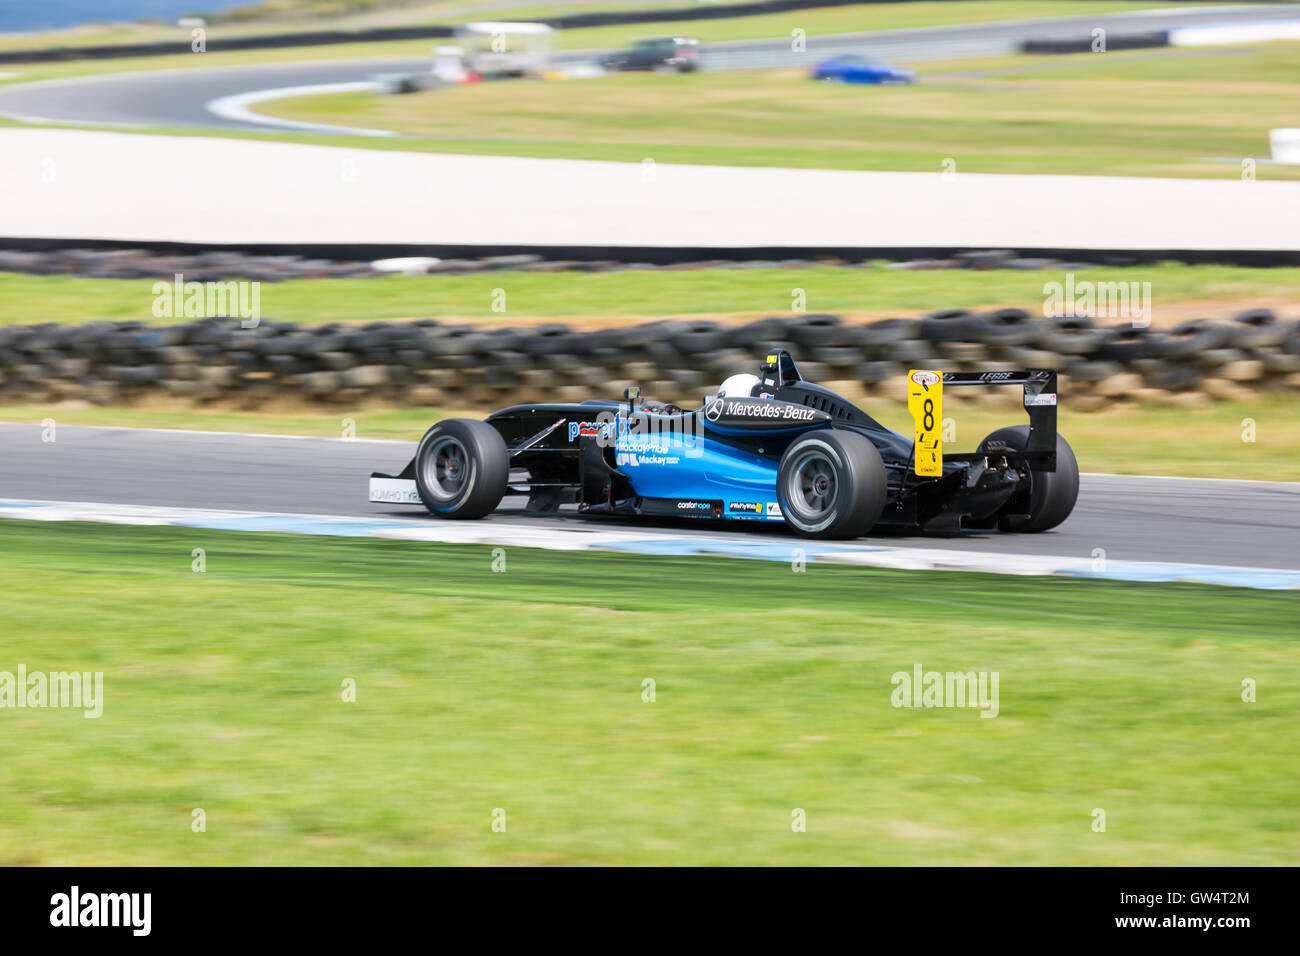 MELBOURNE/AUSTRALIA - SEPTEMBER 9-11, 2016: Racecars going for podium at Round 6 of the Shannon's Nationals at Phillip Island GP Track in Victoria, Australia - 9-11 September. Stock Photo